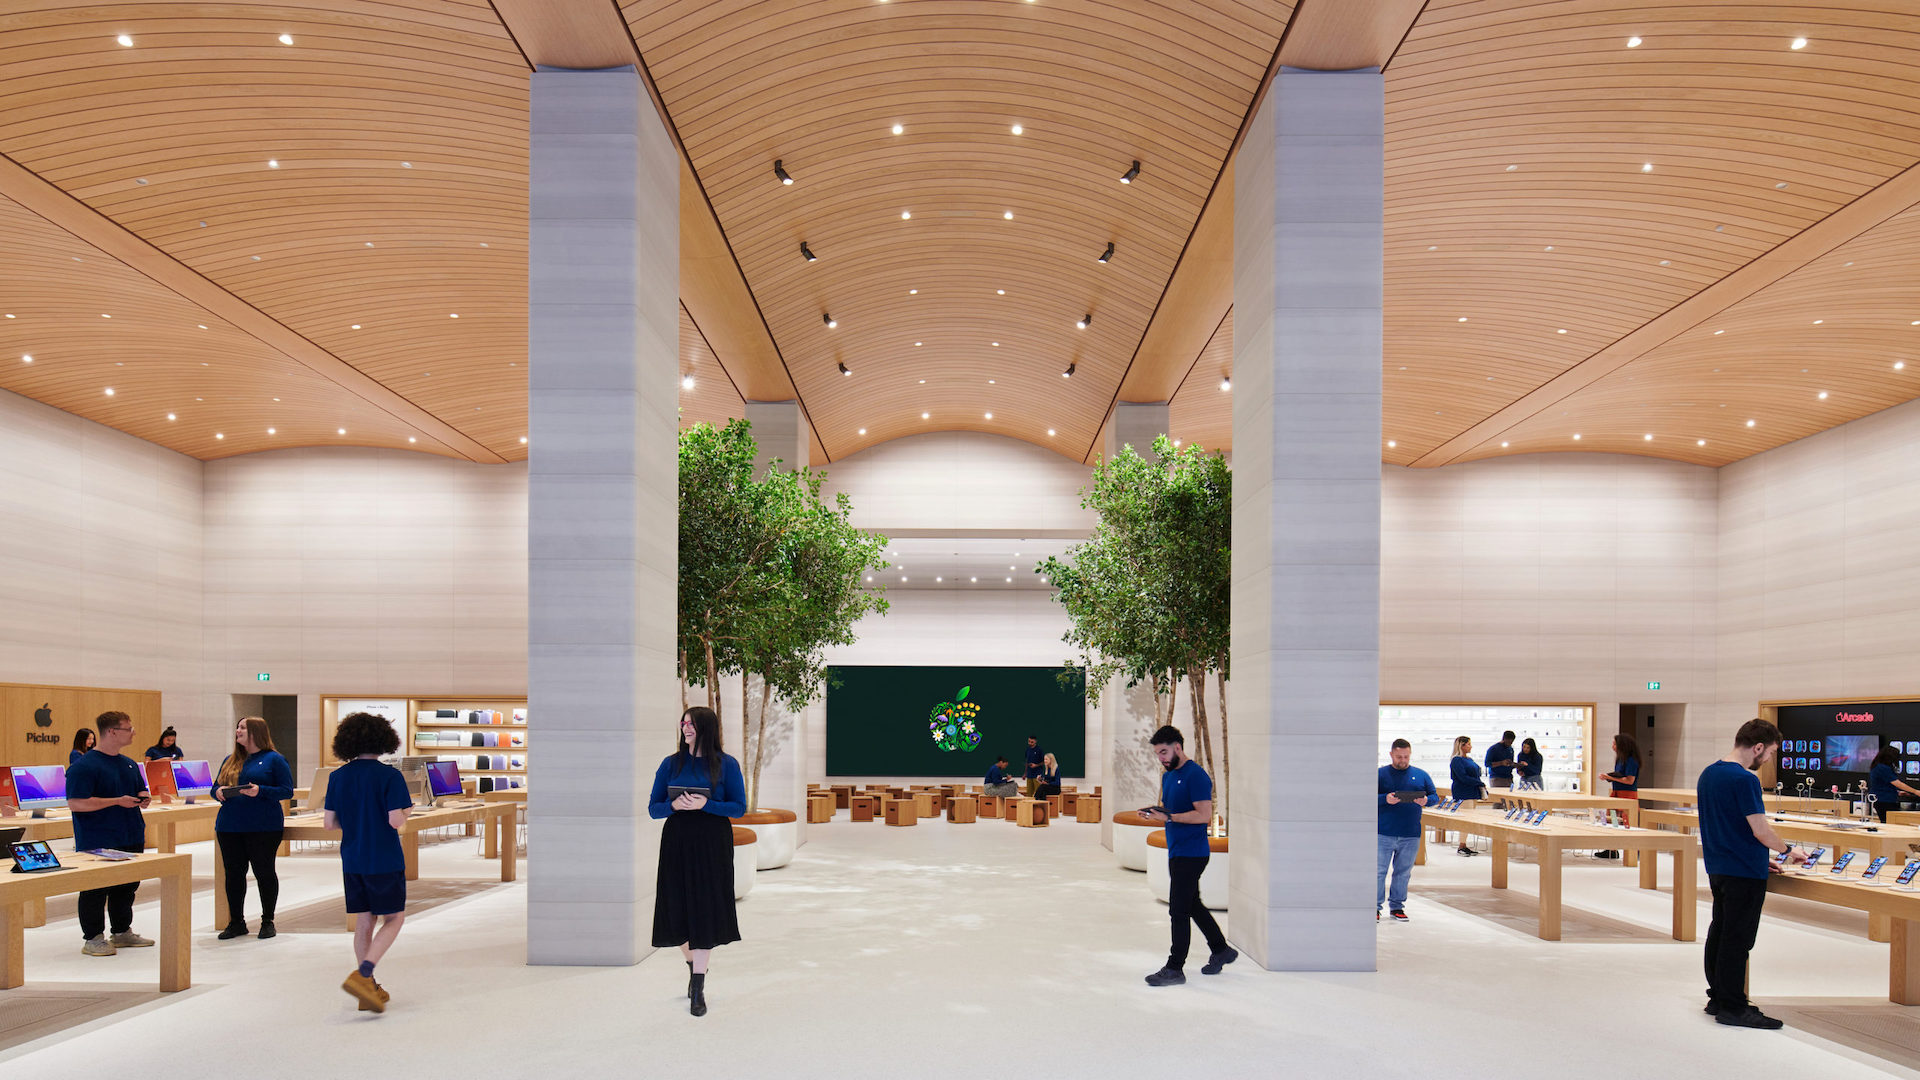 Apple Store Modernization Efforts Continue From Los Angeles to